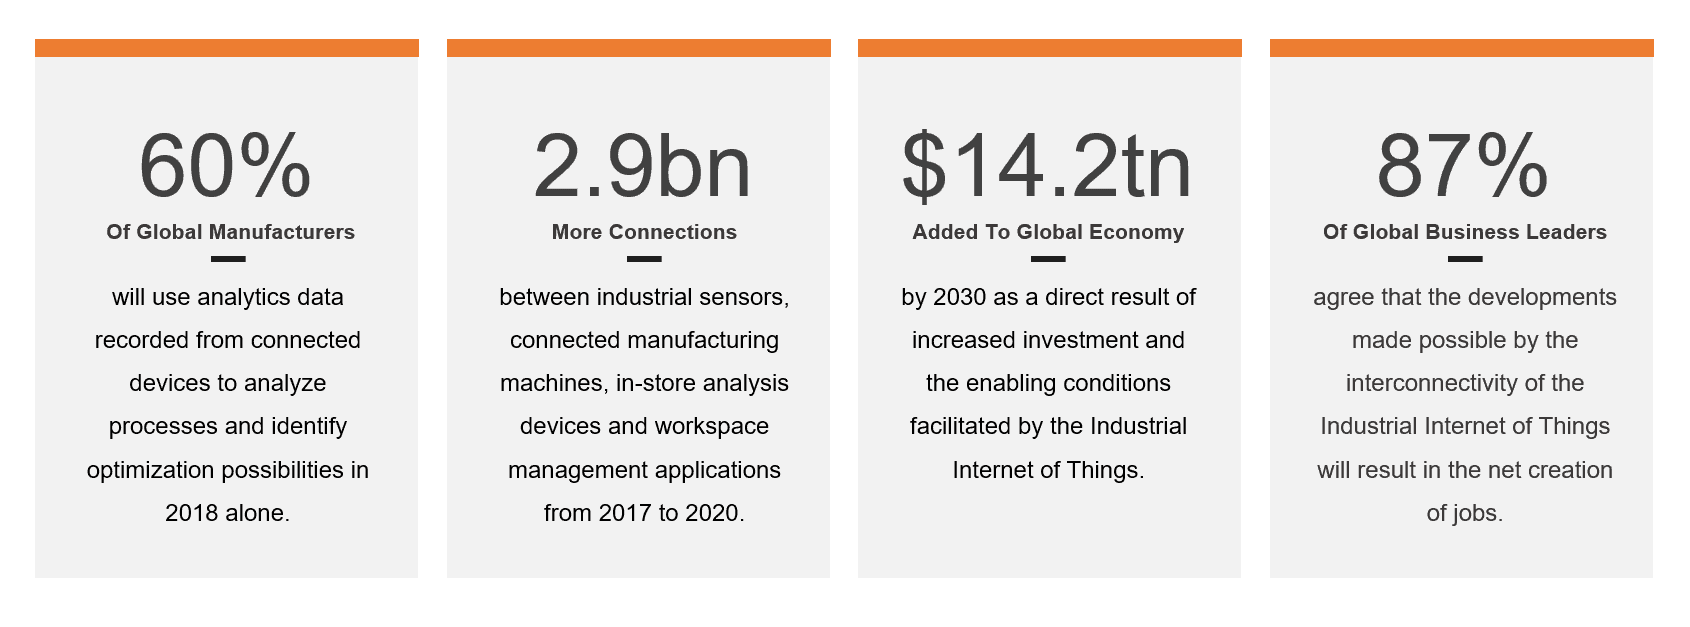 an image of statistics on IIoT devices suggesting the Industrial Internet of Things will becomes stronger as one of the top 5 technology trends in 2019 according to encompass solutions.